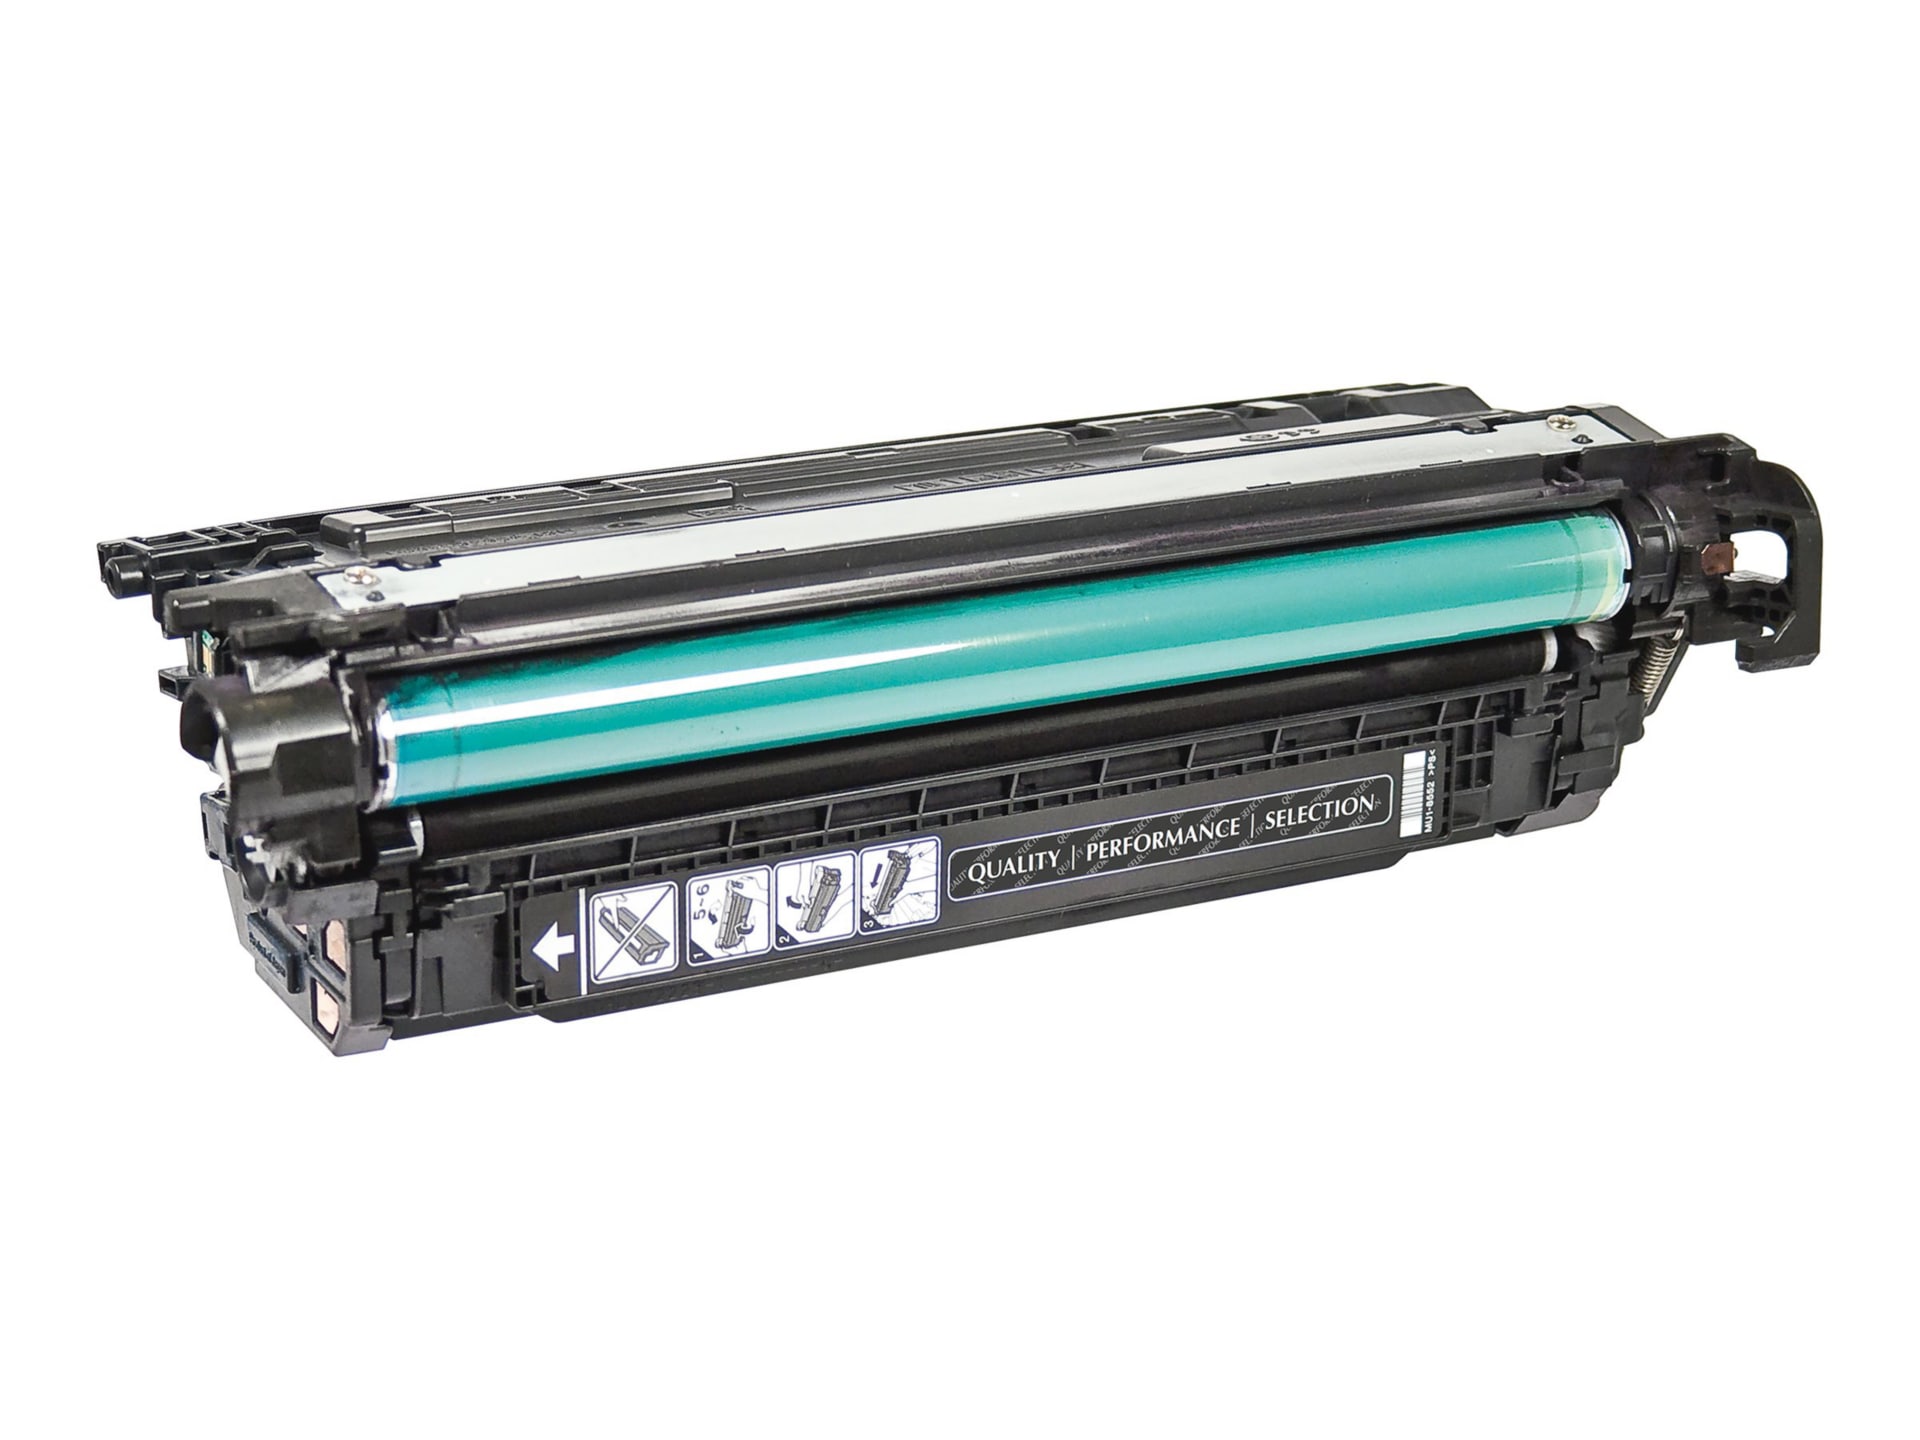 Clover Remanufactured Toner for HP CE260X (649X), Black, 17,000 page yield